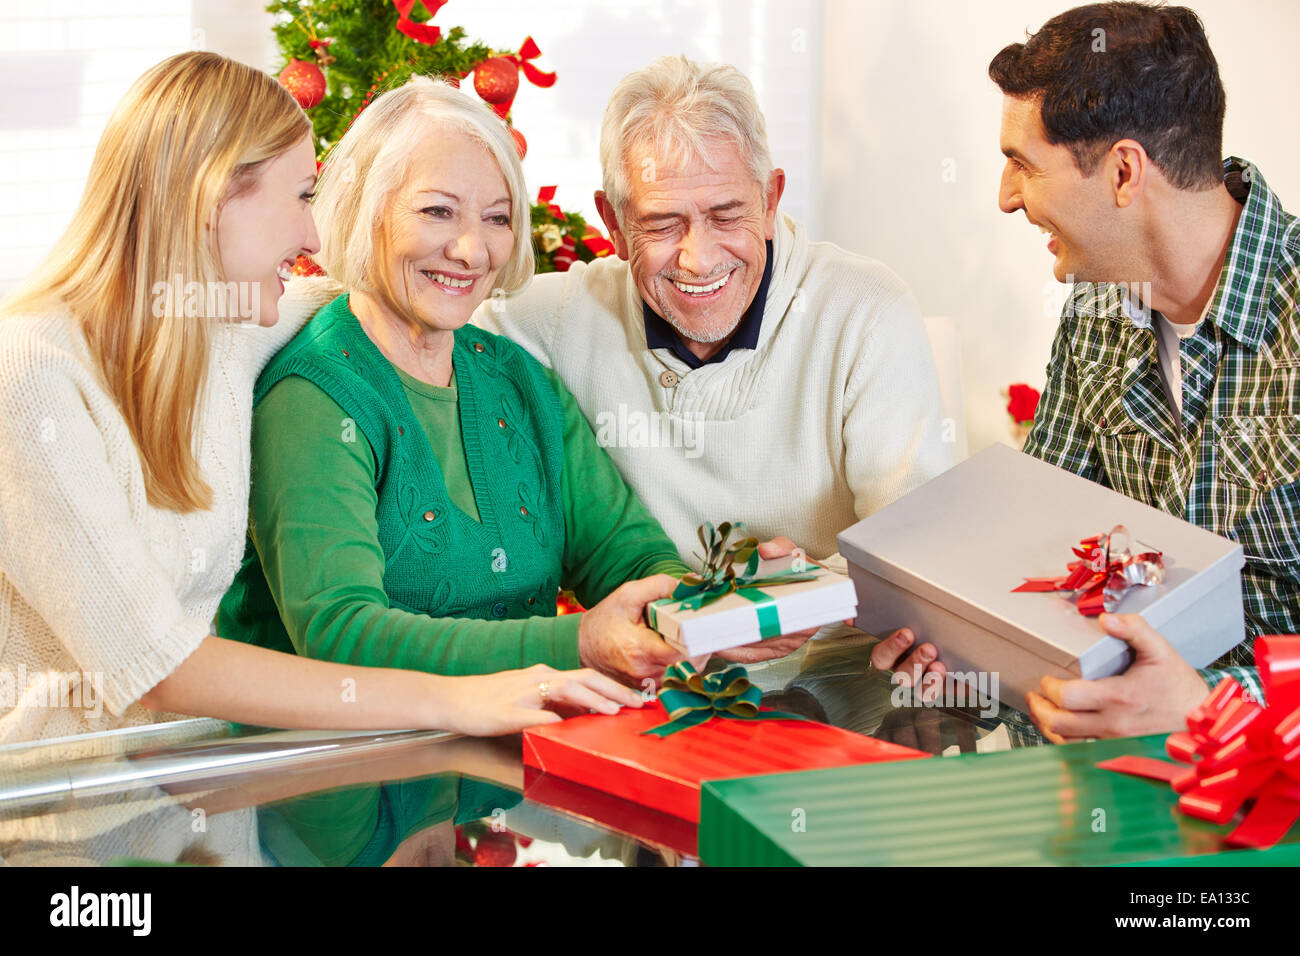 Happy senior citizens celebrating christmas with their children and gifts Stock Photo